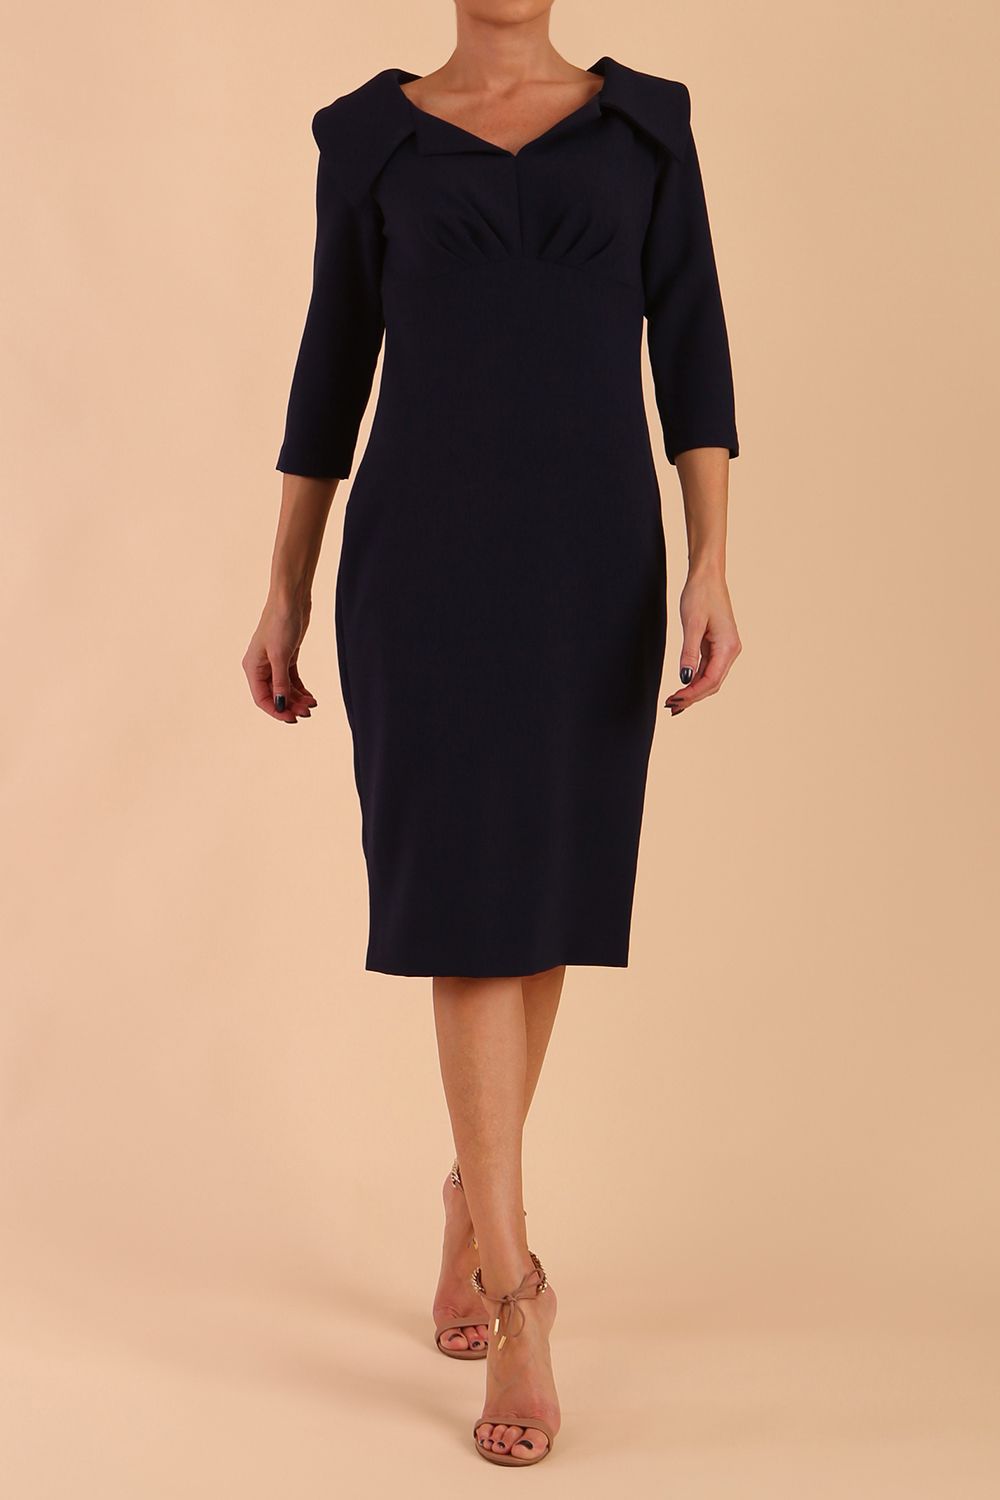 Model wearing Diva catwalk Venetia pencil figure fitted dress in navy blue with three quarter sleeve front